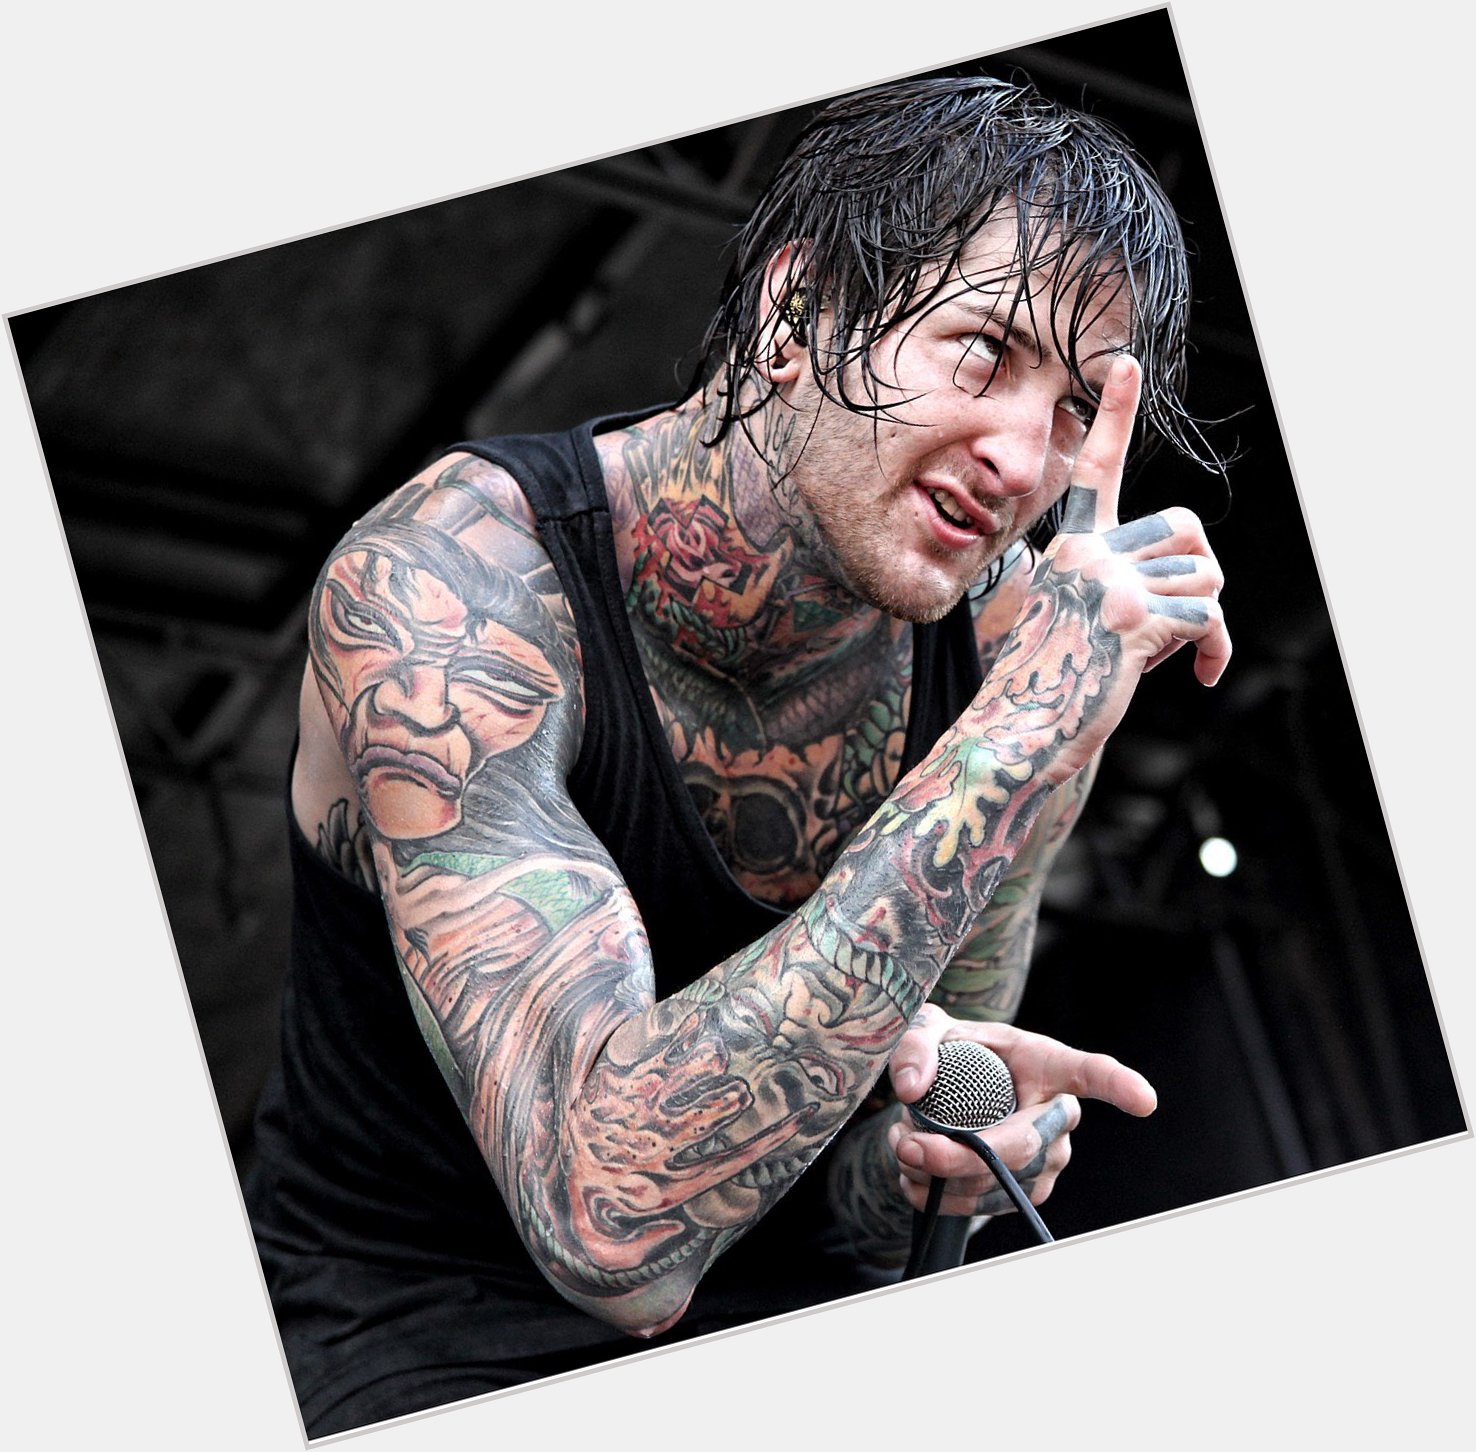 Happy Birthday Mitch Lucker. He would have been 36 years old. 